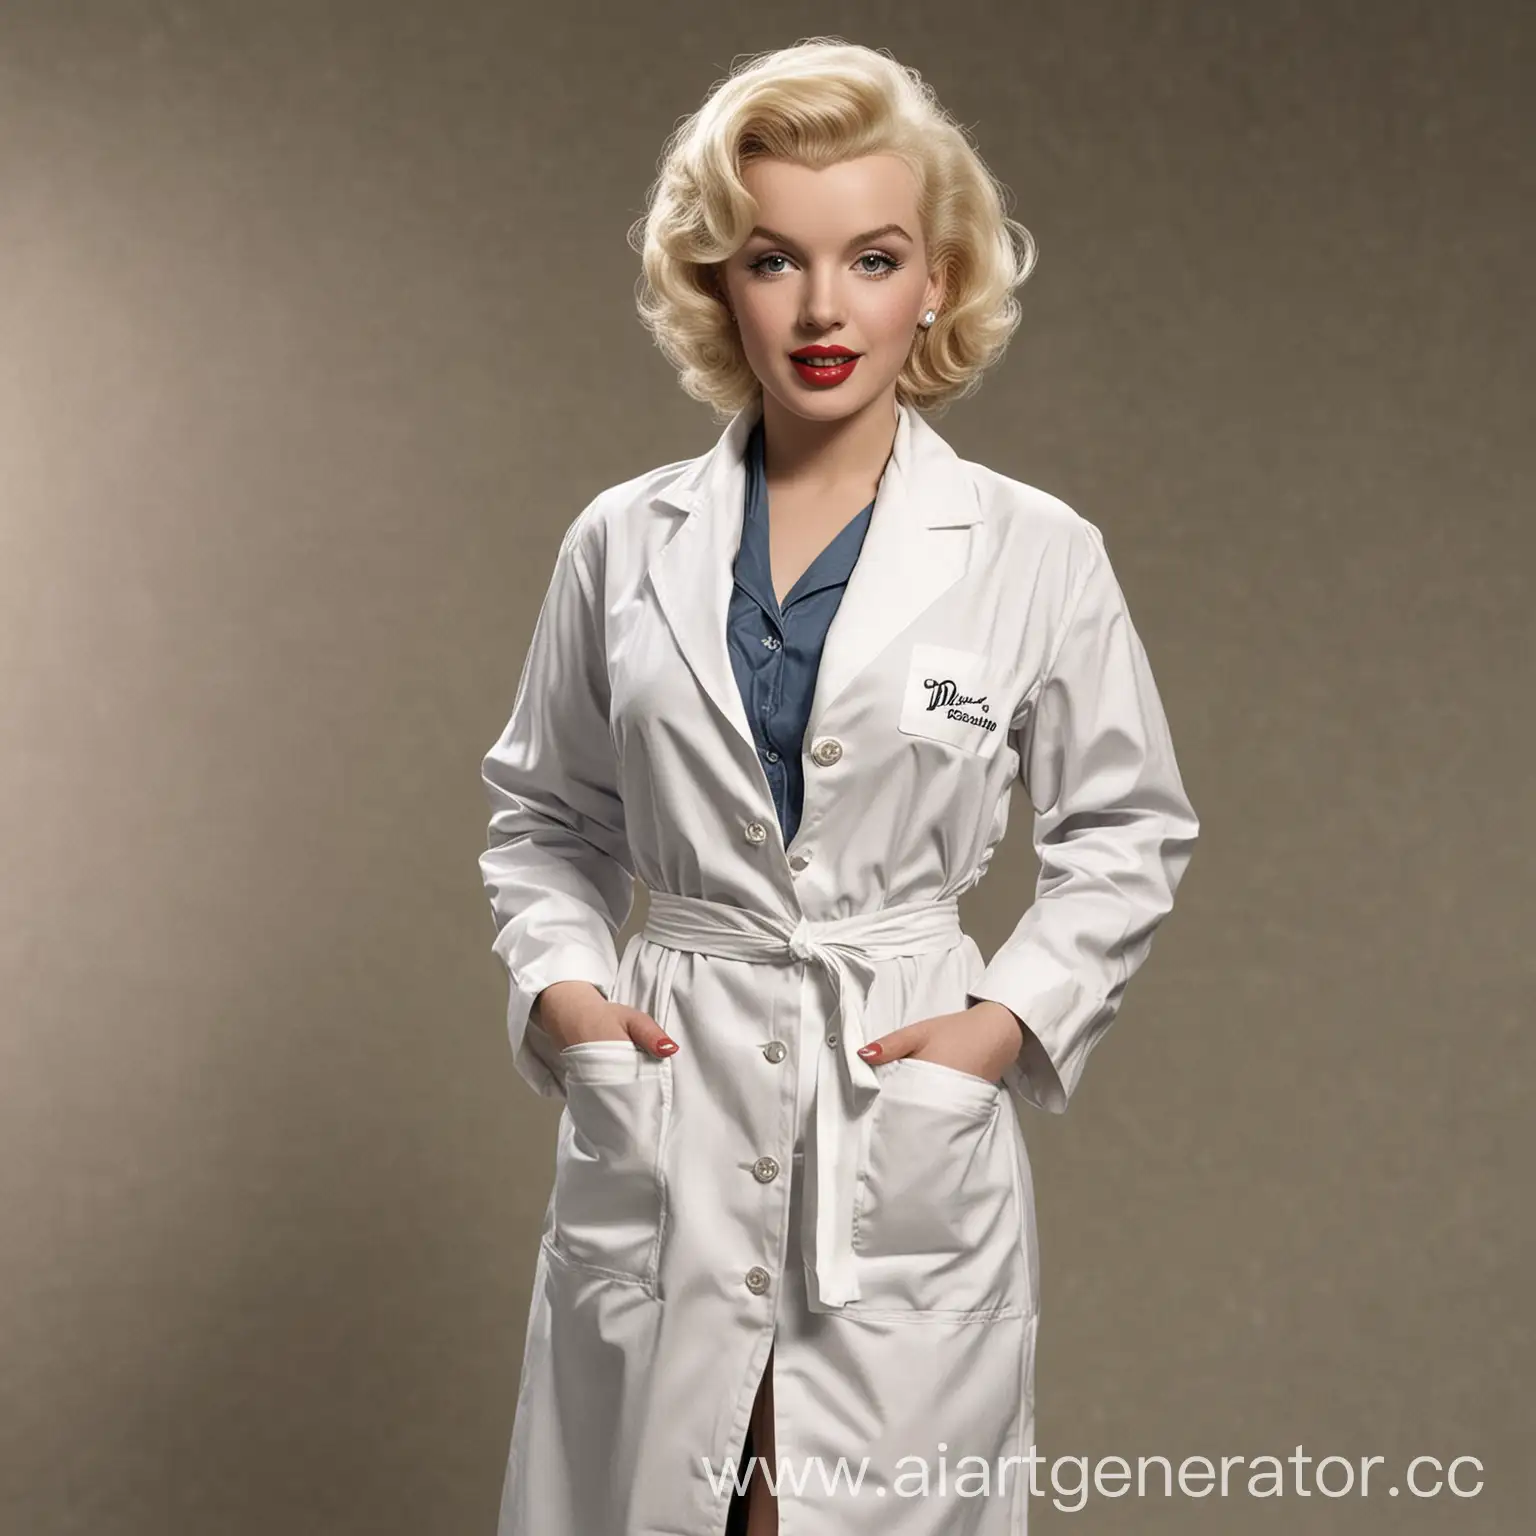 Marilyn-Monroe-Dressed-as-a-Doctor-for-Hollywood-Photoshoot